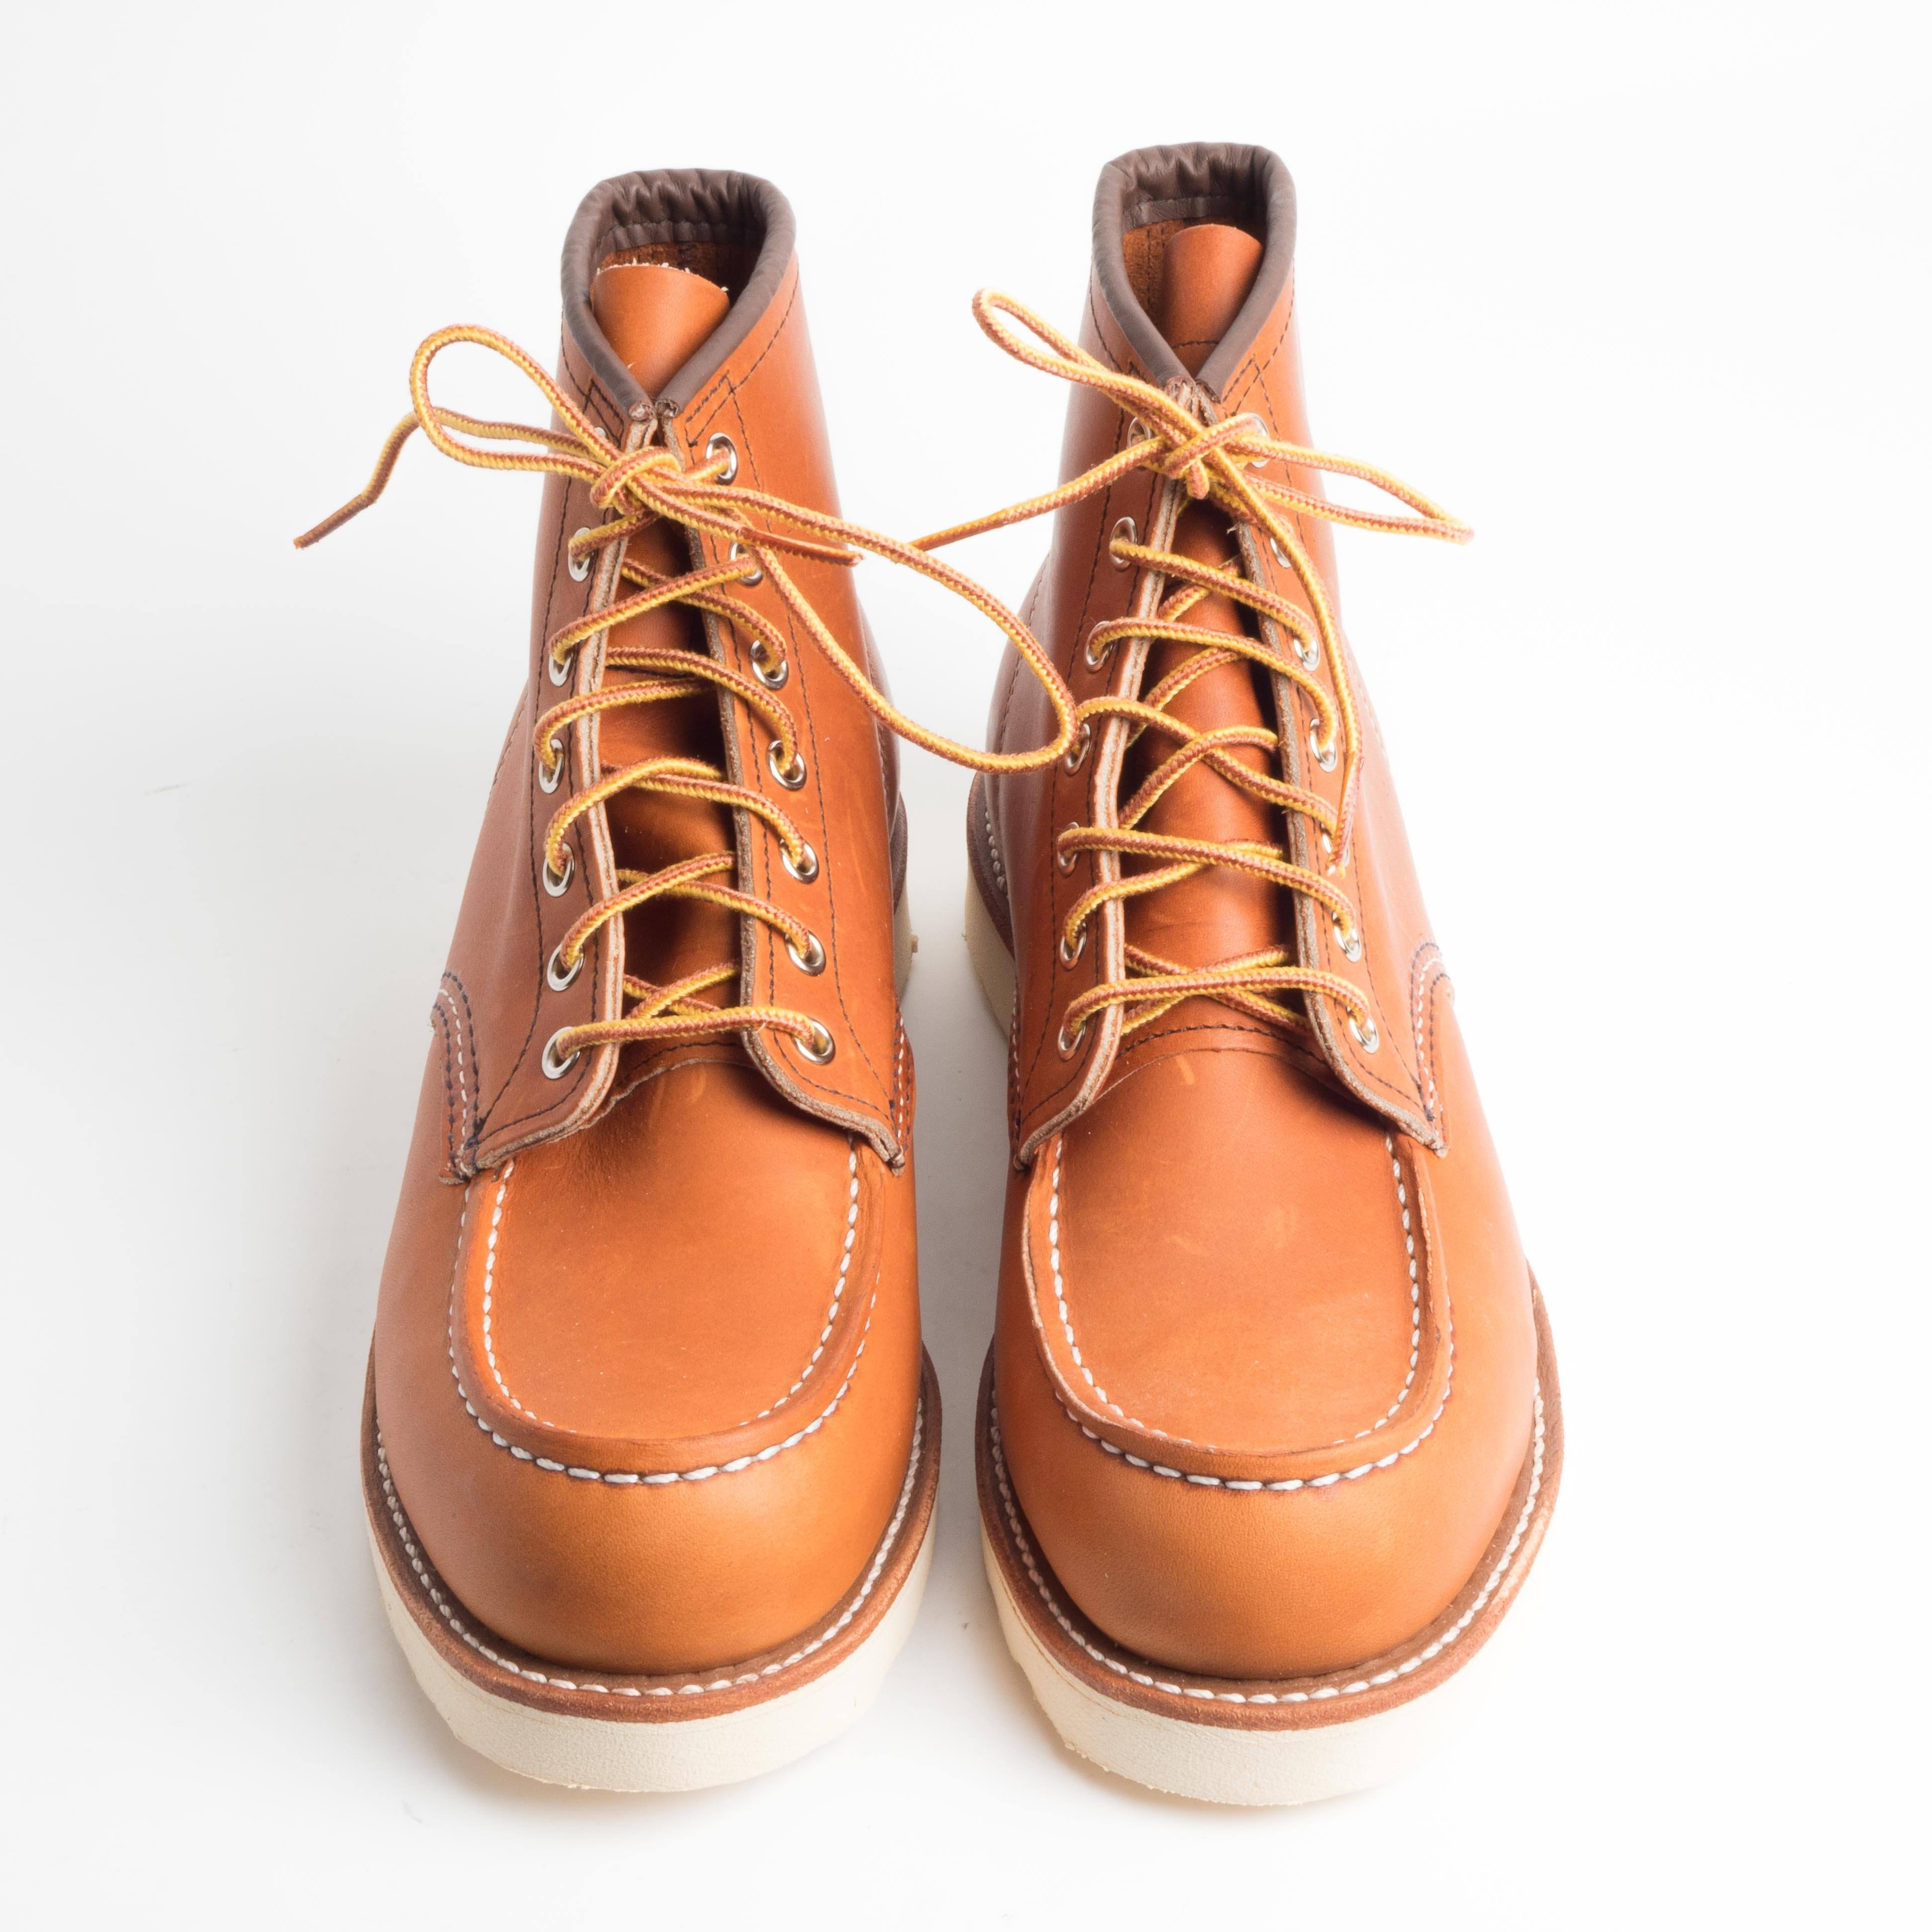 RED WING - AI 2018/19 - Classic Moc 875 - Oro Legacy Scarpe Uomo Red Wing Shoes 